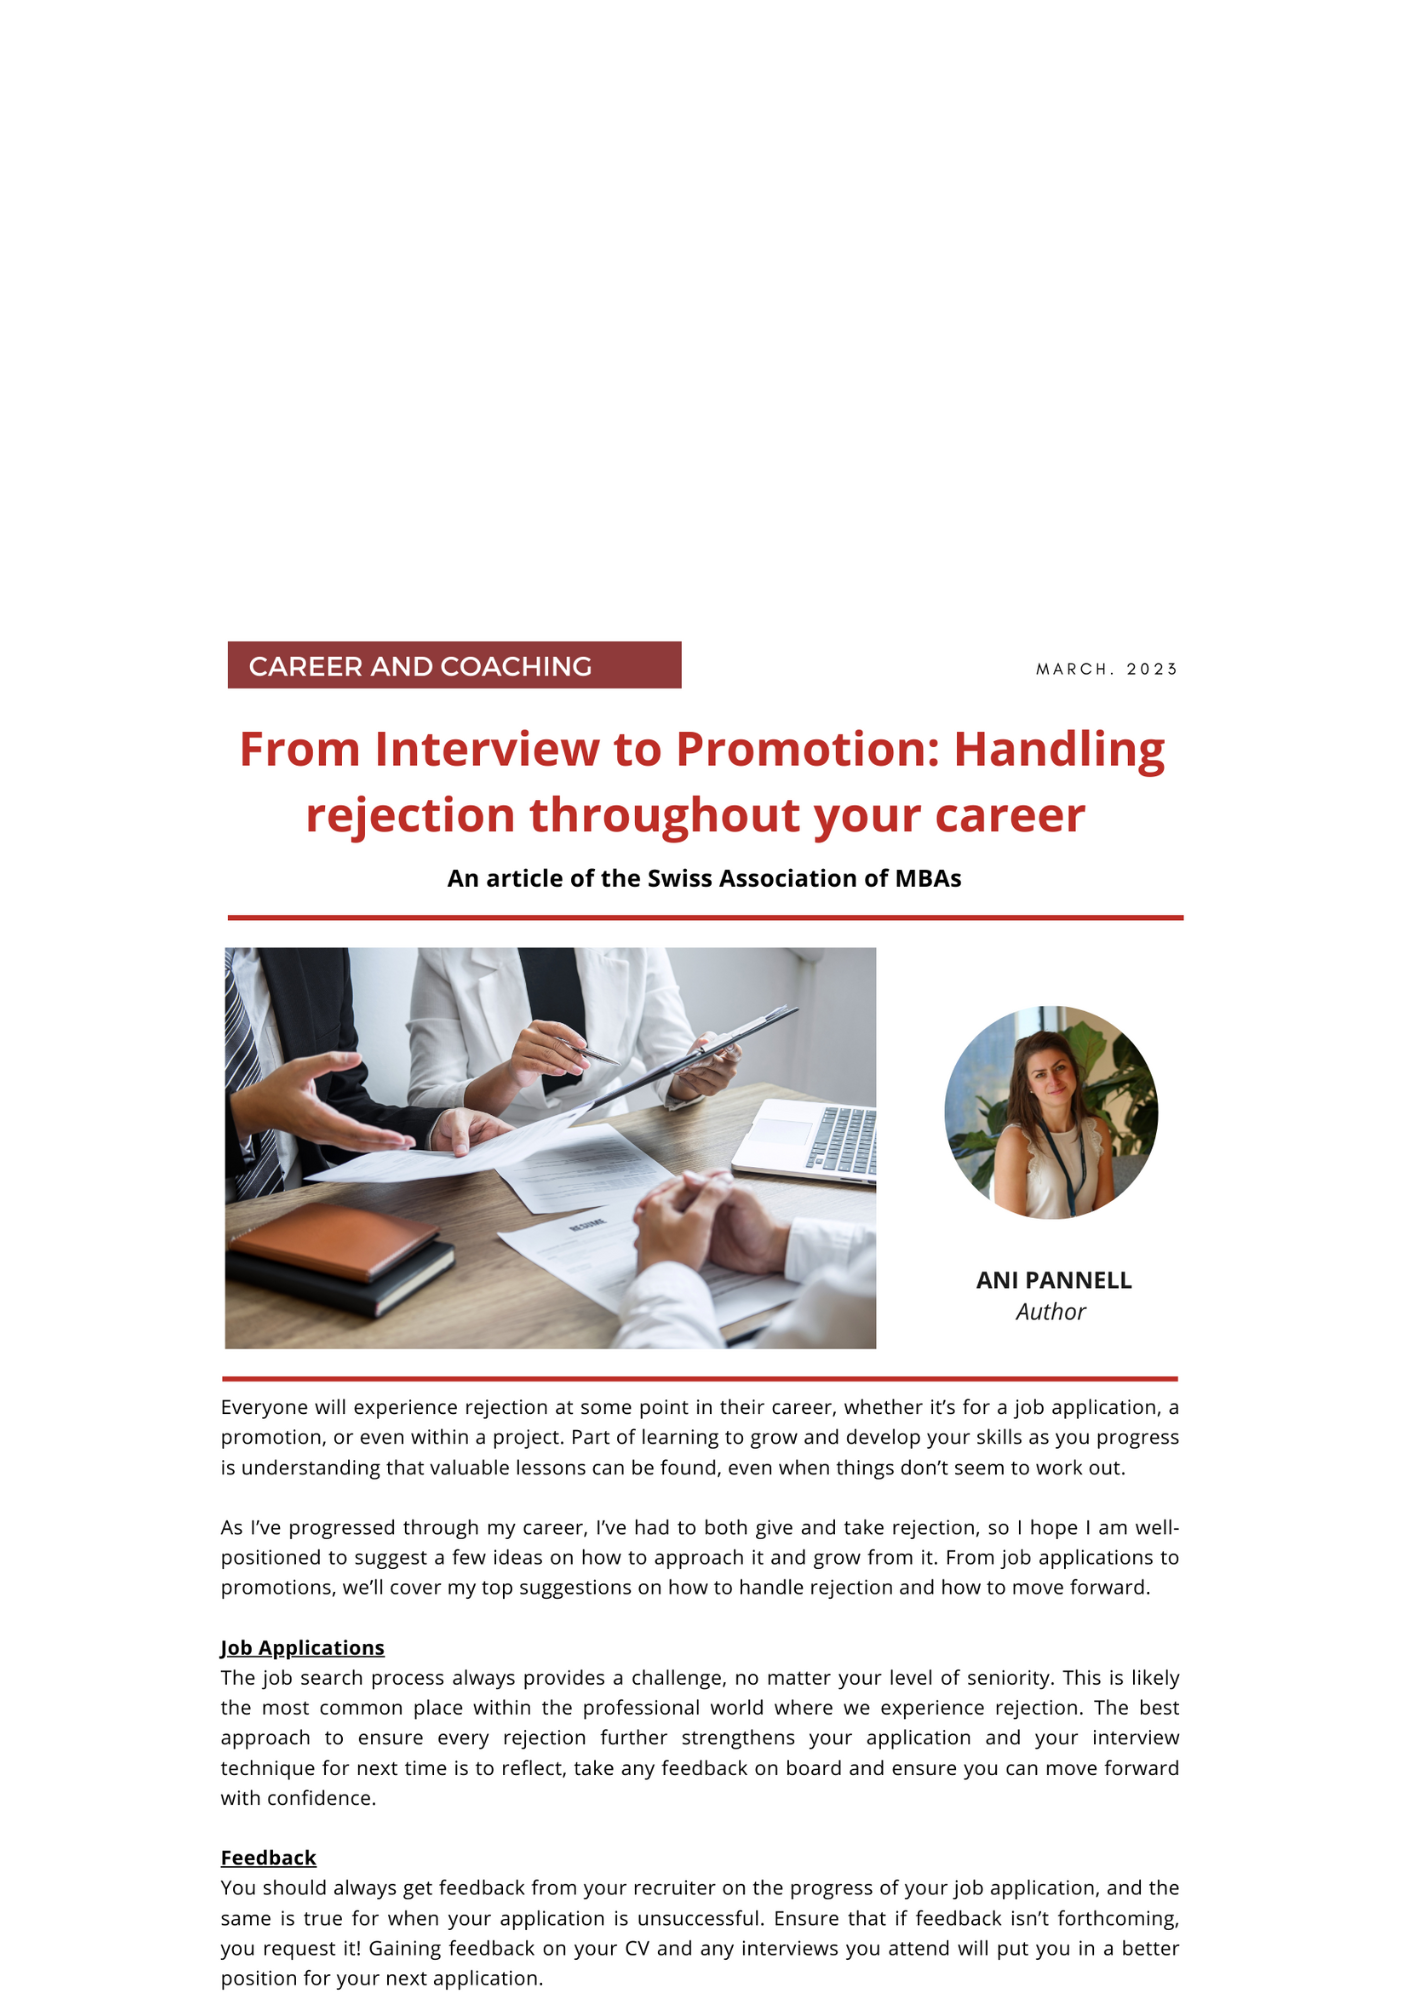 From Interview to Promotion: Handling rejection throughout your career